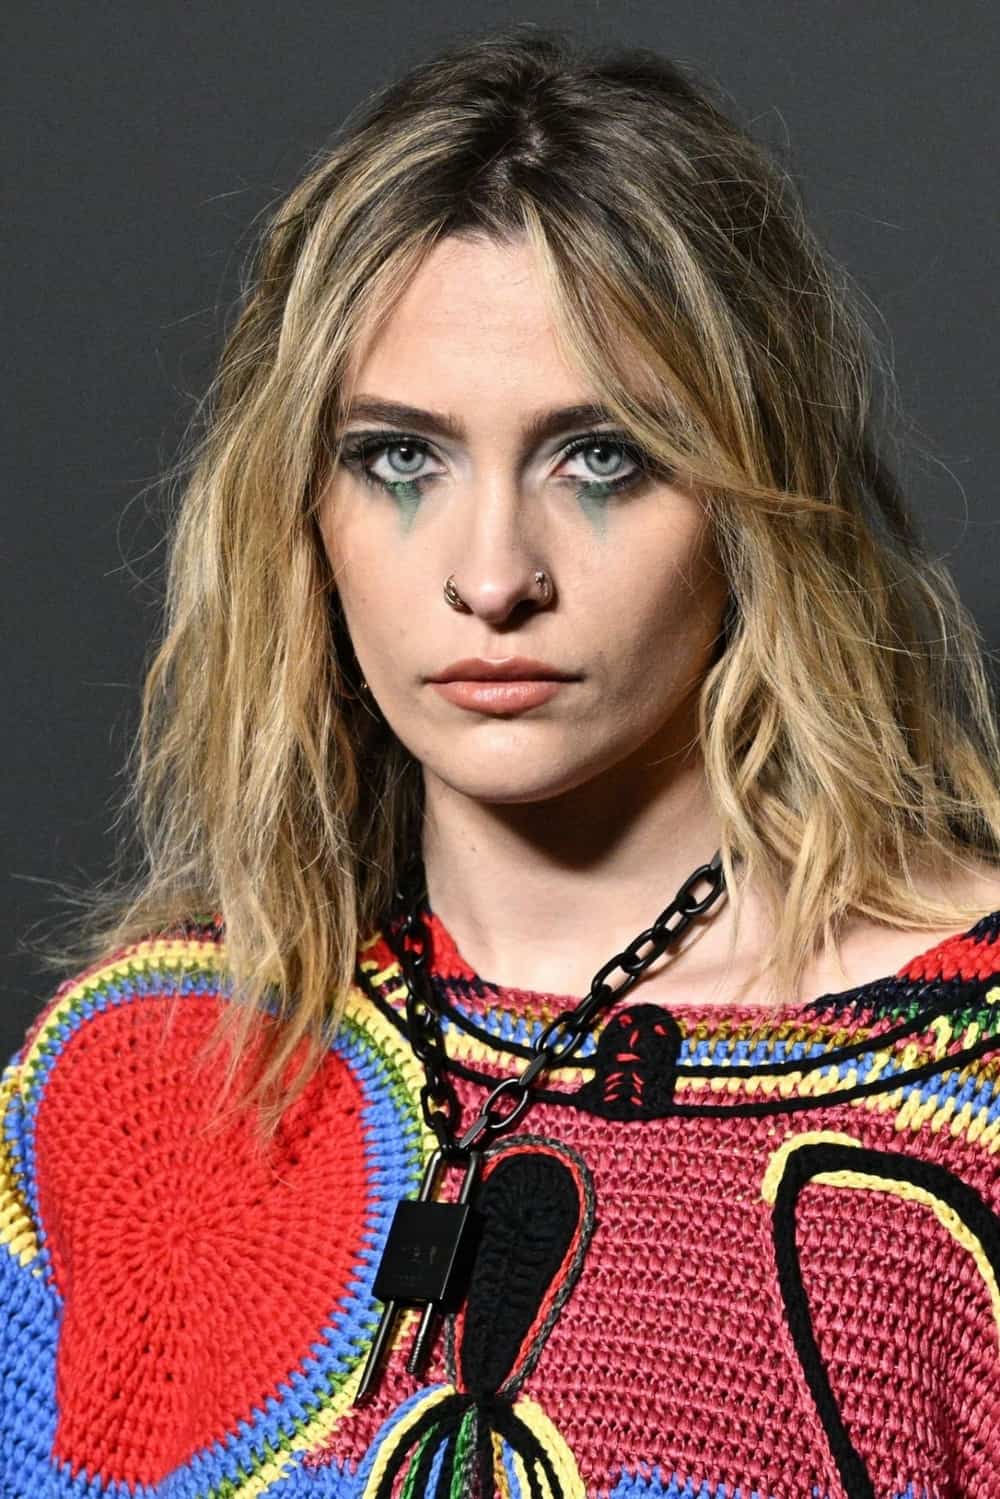 Paris Jackson Appears Attractive in a Long Knitted Sweater During PFW 2022